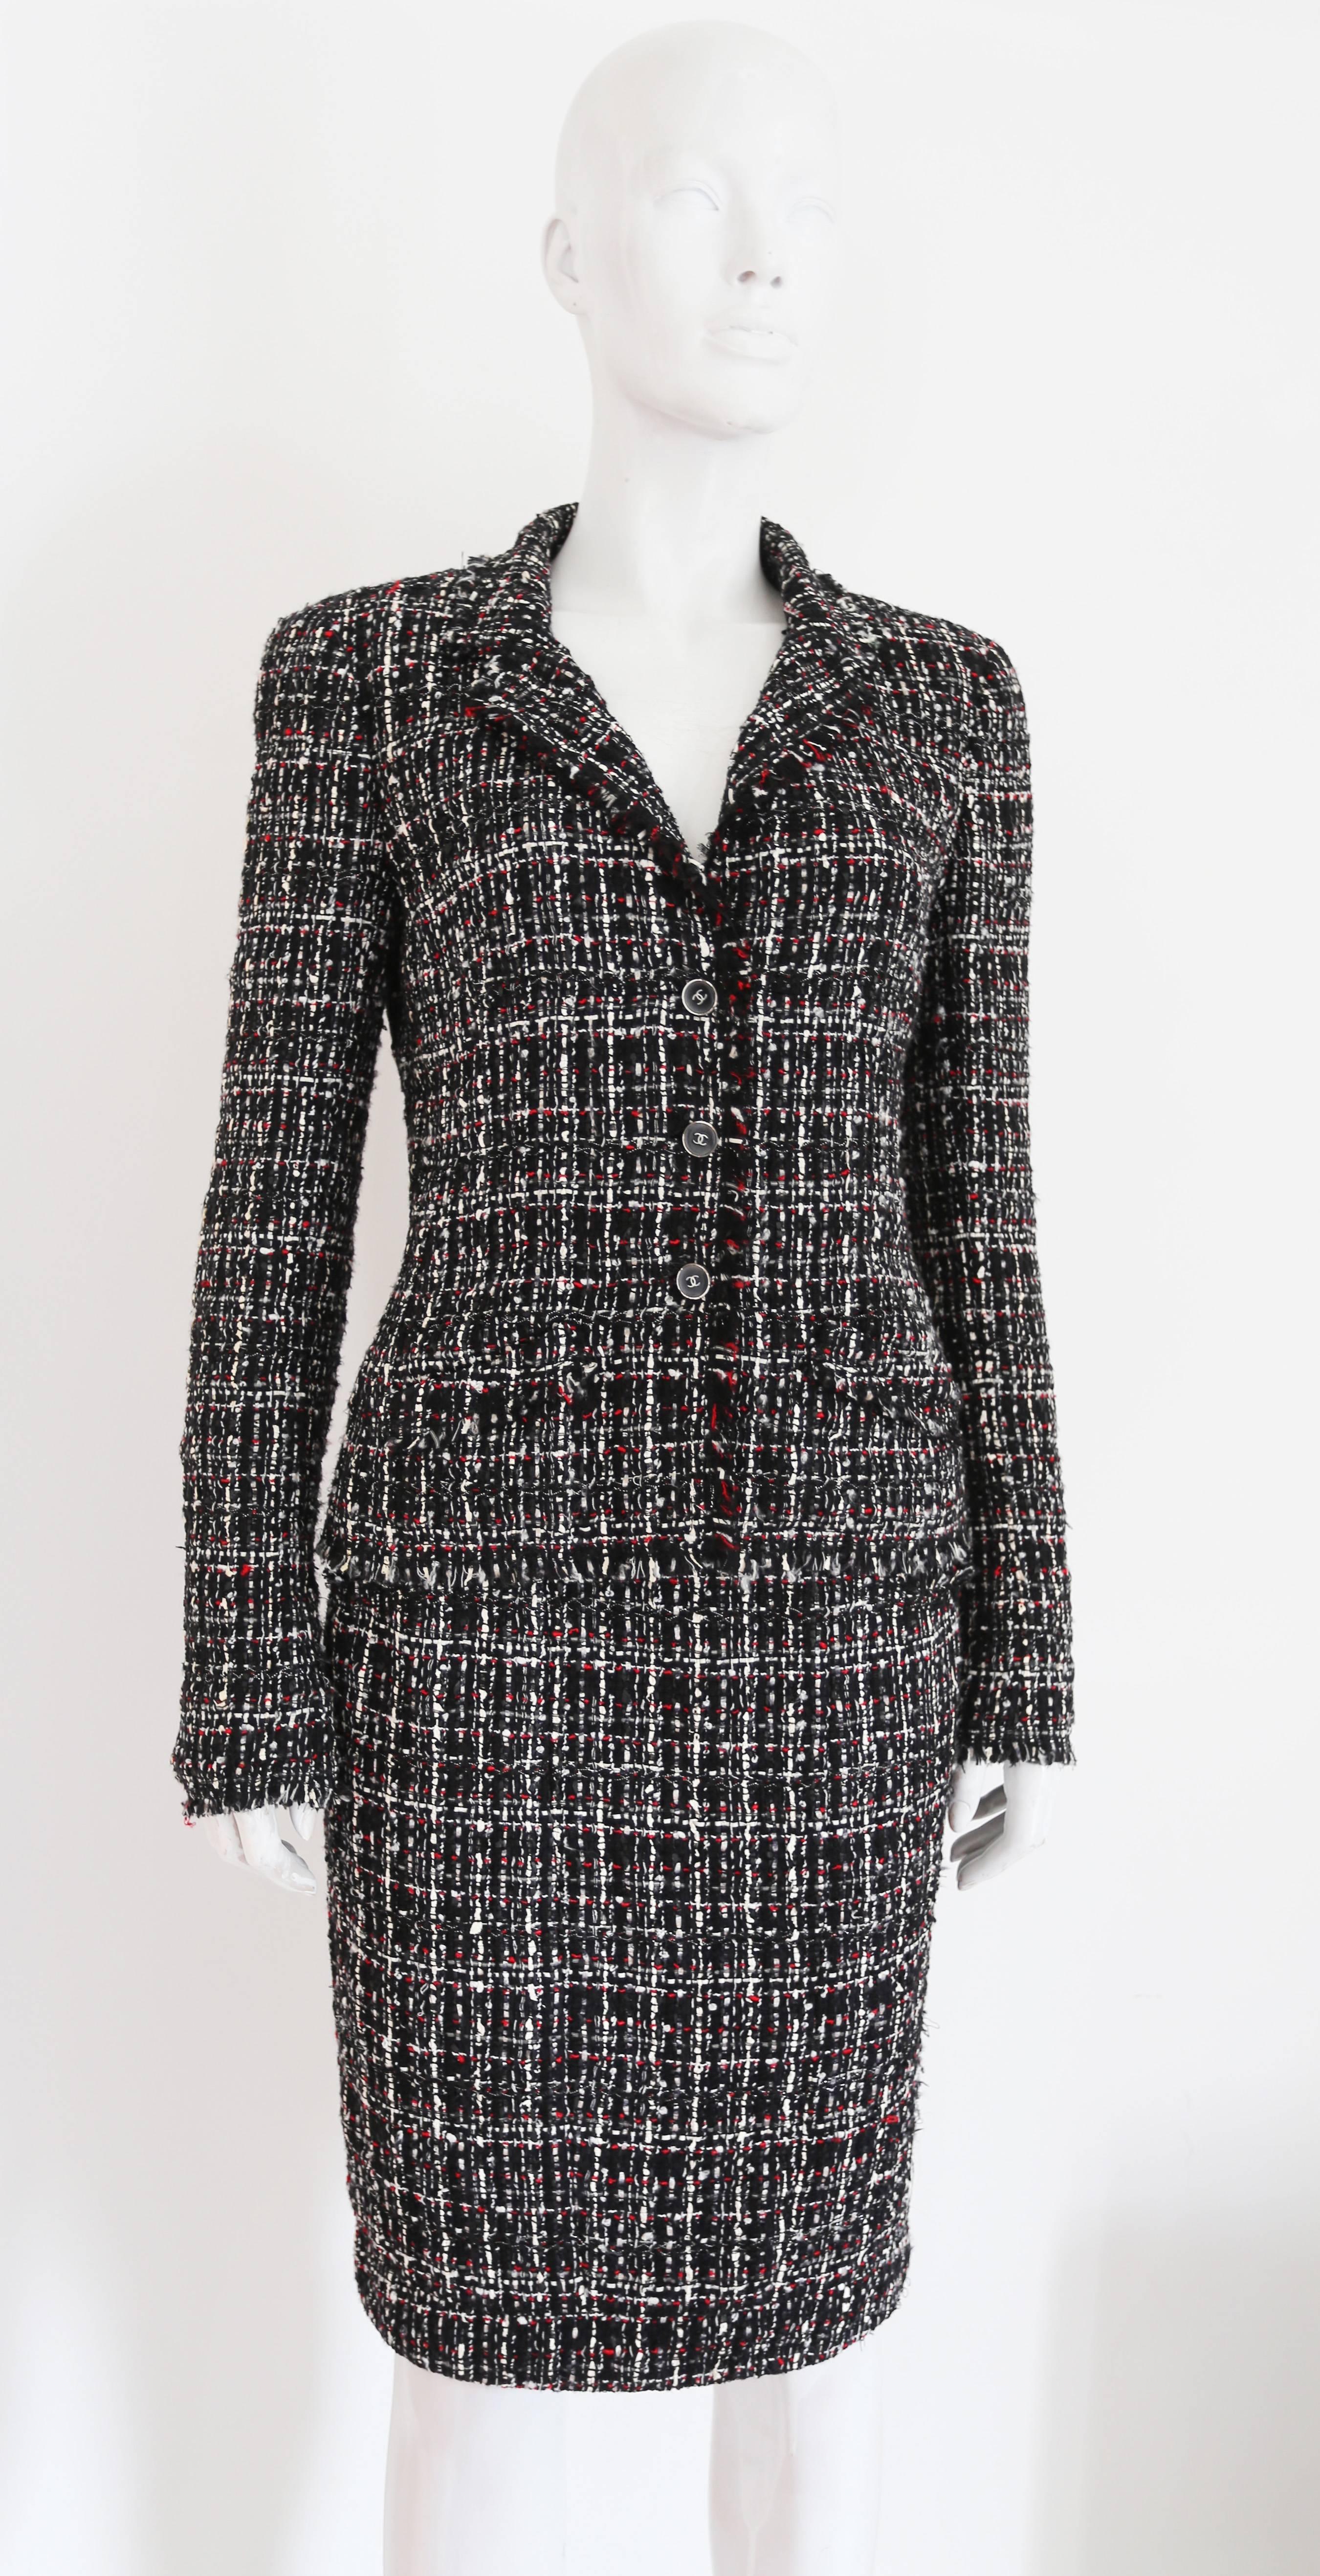 Chanel tweed skirt suit, circa 2005. The suit includes a tailored jacket with frayed trim, silk chiffon lining and CC logo buttons throughout and a fitted pencil skirt with two hidden front pockets.  The tweed consists of woven red, black and white